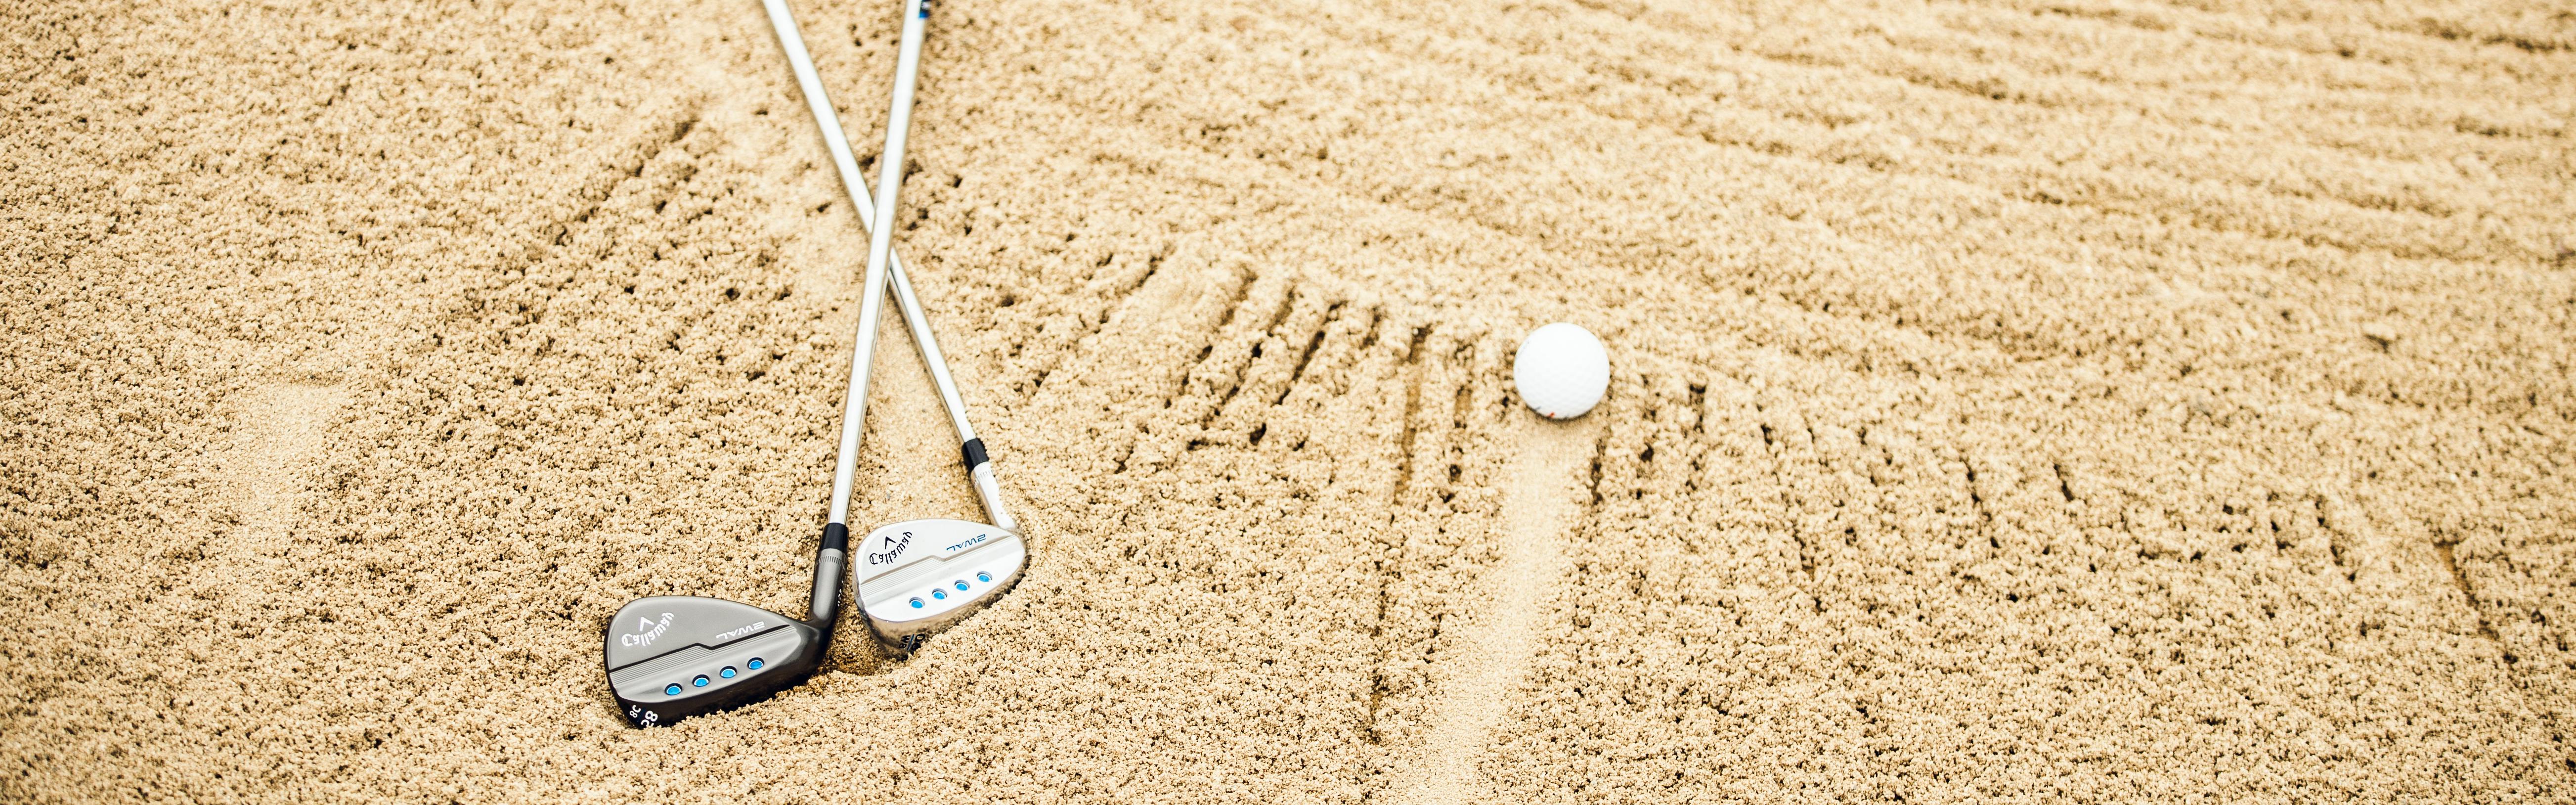 Two golf wedges in the sand next to a golf ball